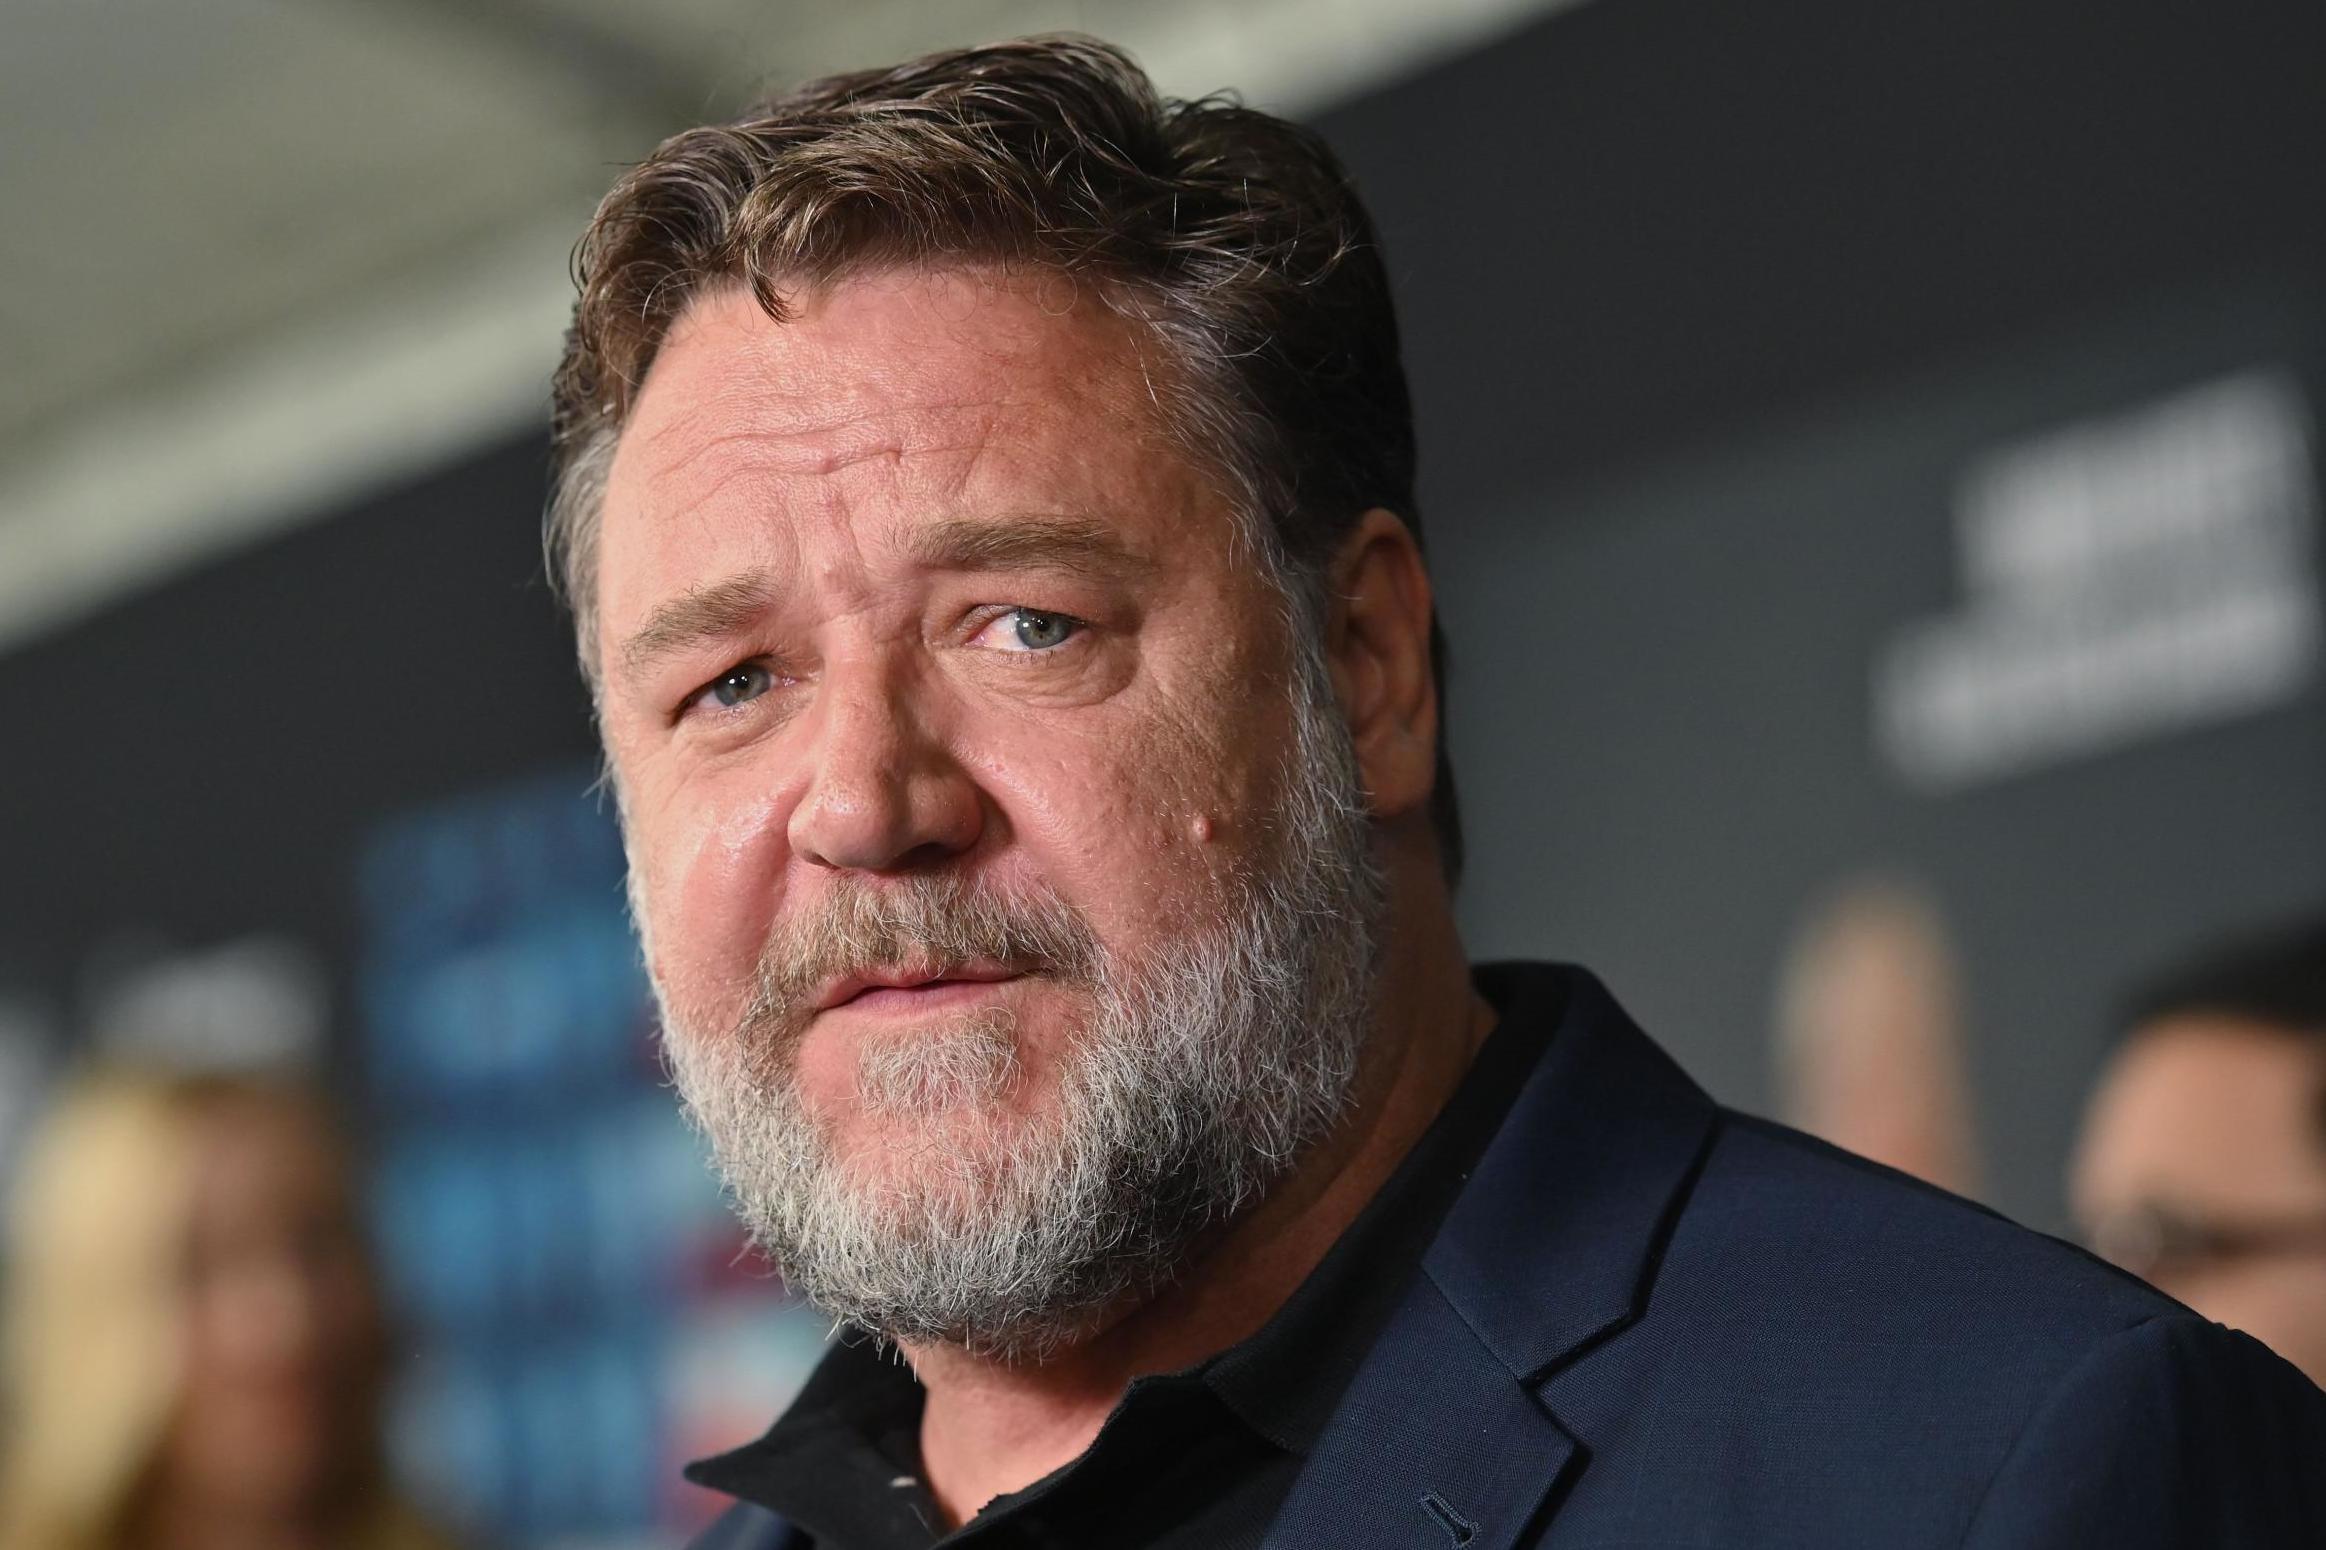 Russell Crowe says he asked Jared Kushner for insight on how to play Roger Ailes